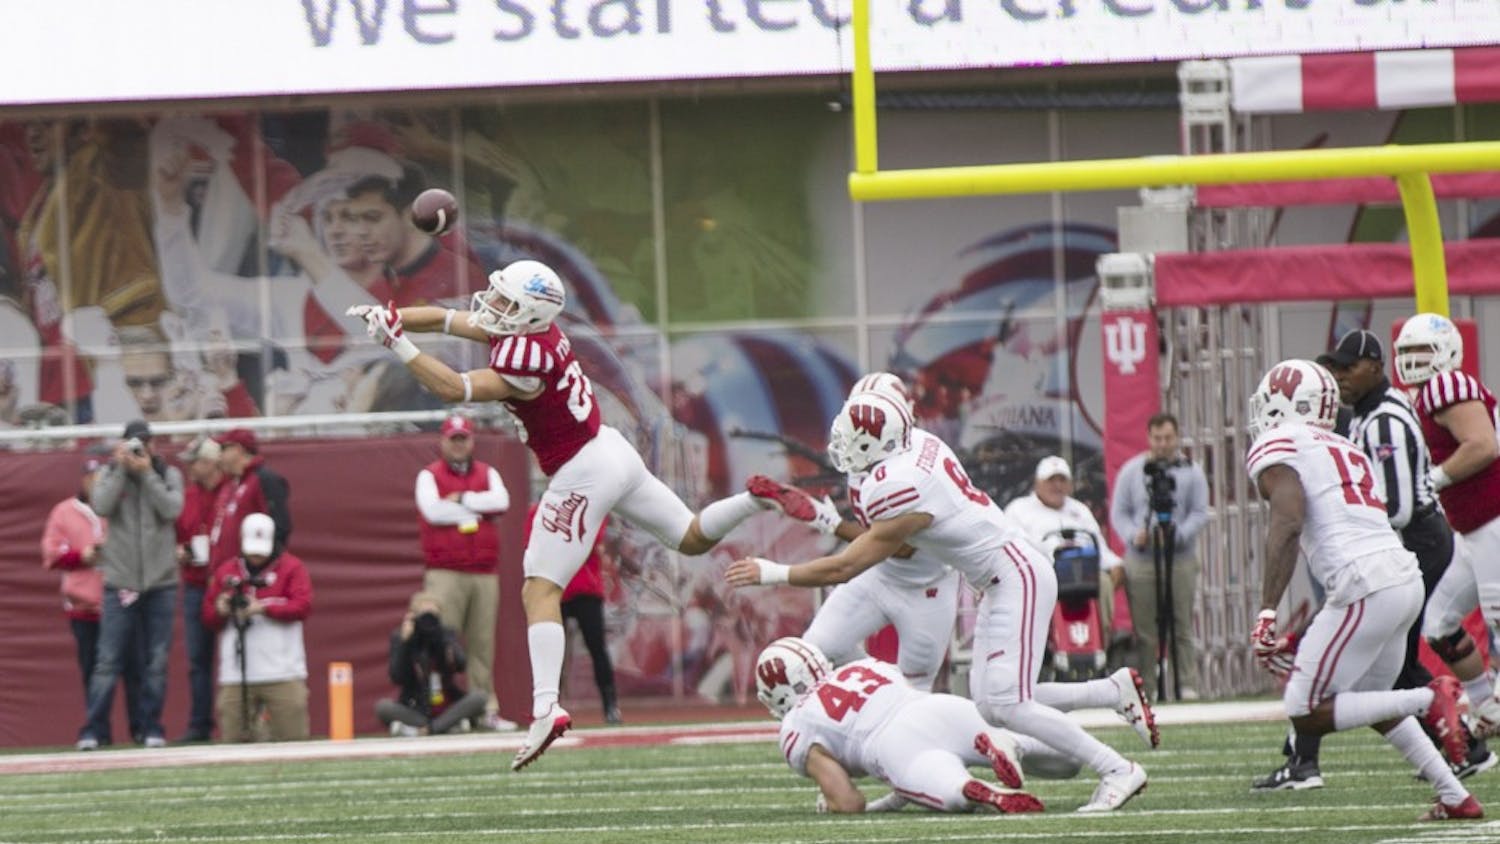 Junior wide receiver Luke Timian is unable to complete a catch at Memorial Stadium on Saturday against No. 9 Wisconsin. IU lost to Wisconsin 45-17 to drop to 3-6 overall, and 0-6 in Big Ten play this season.